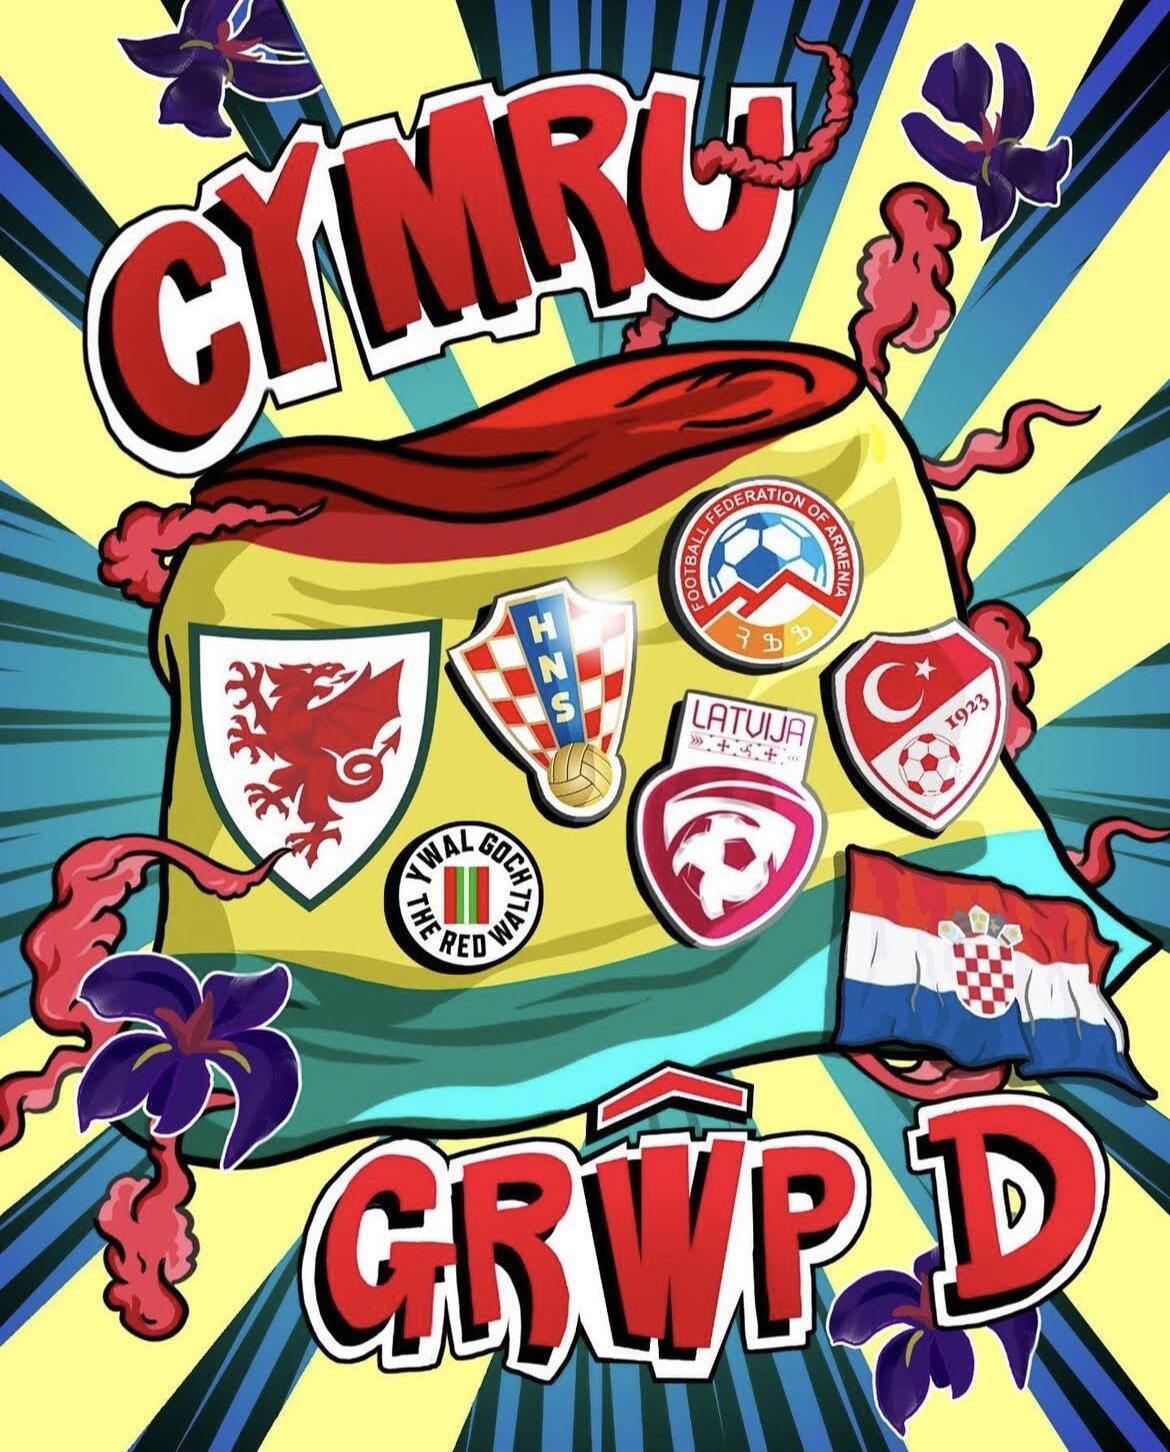 Art of a bucket hat surrounded by daffodils with different country's national football team logos and the words "Wales Group D" in Welsh.